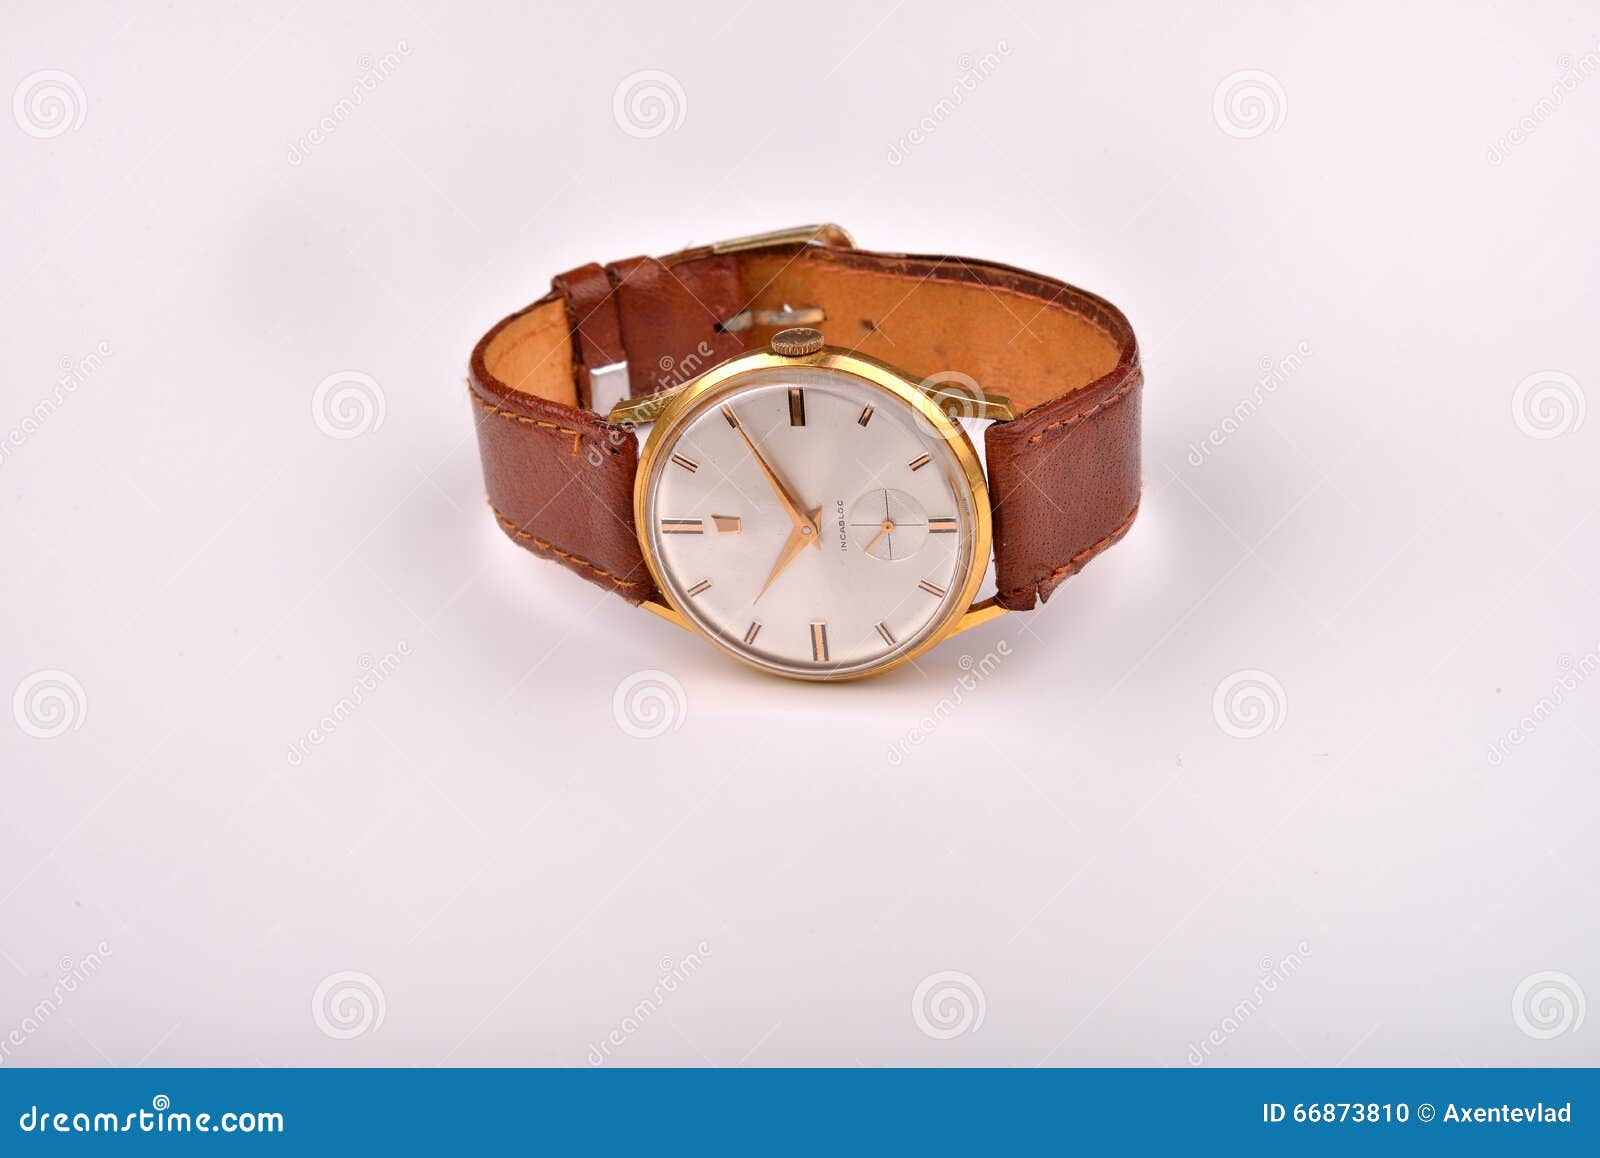 Old Classic Wrist Watch for Man with Brown Strap on White Stock Photo ...